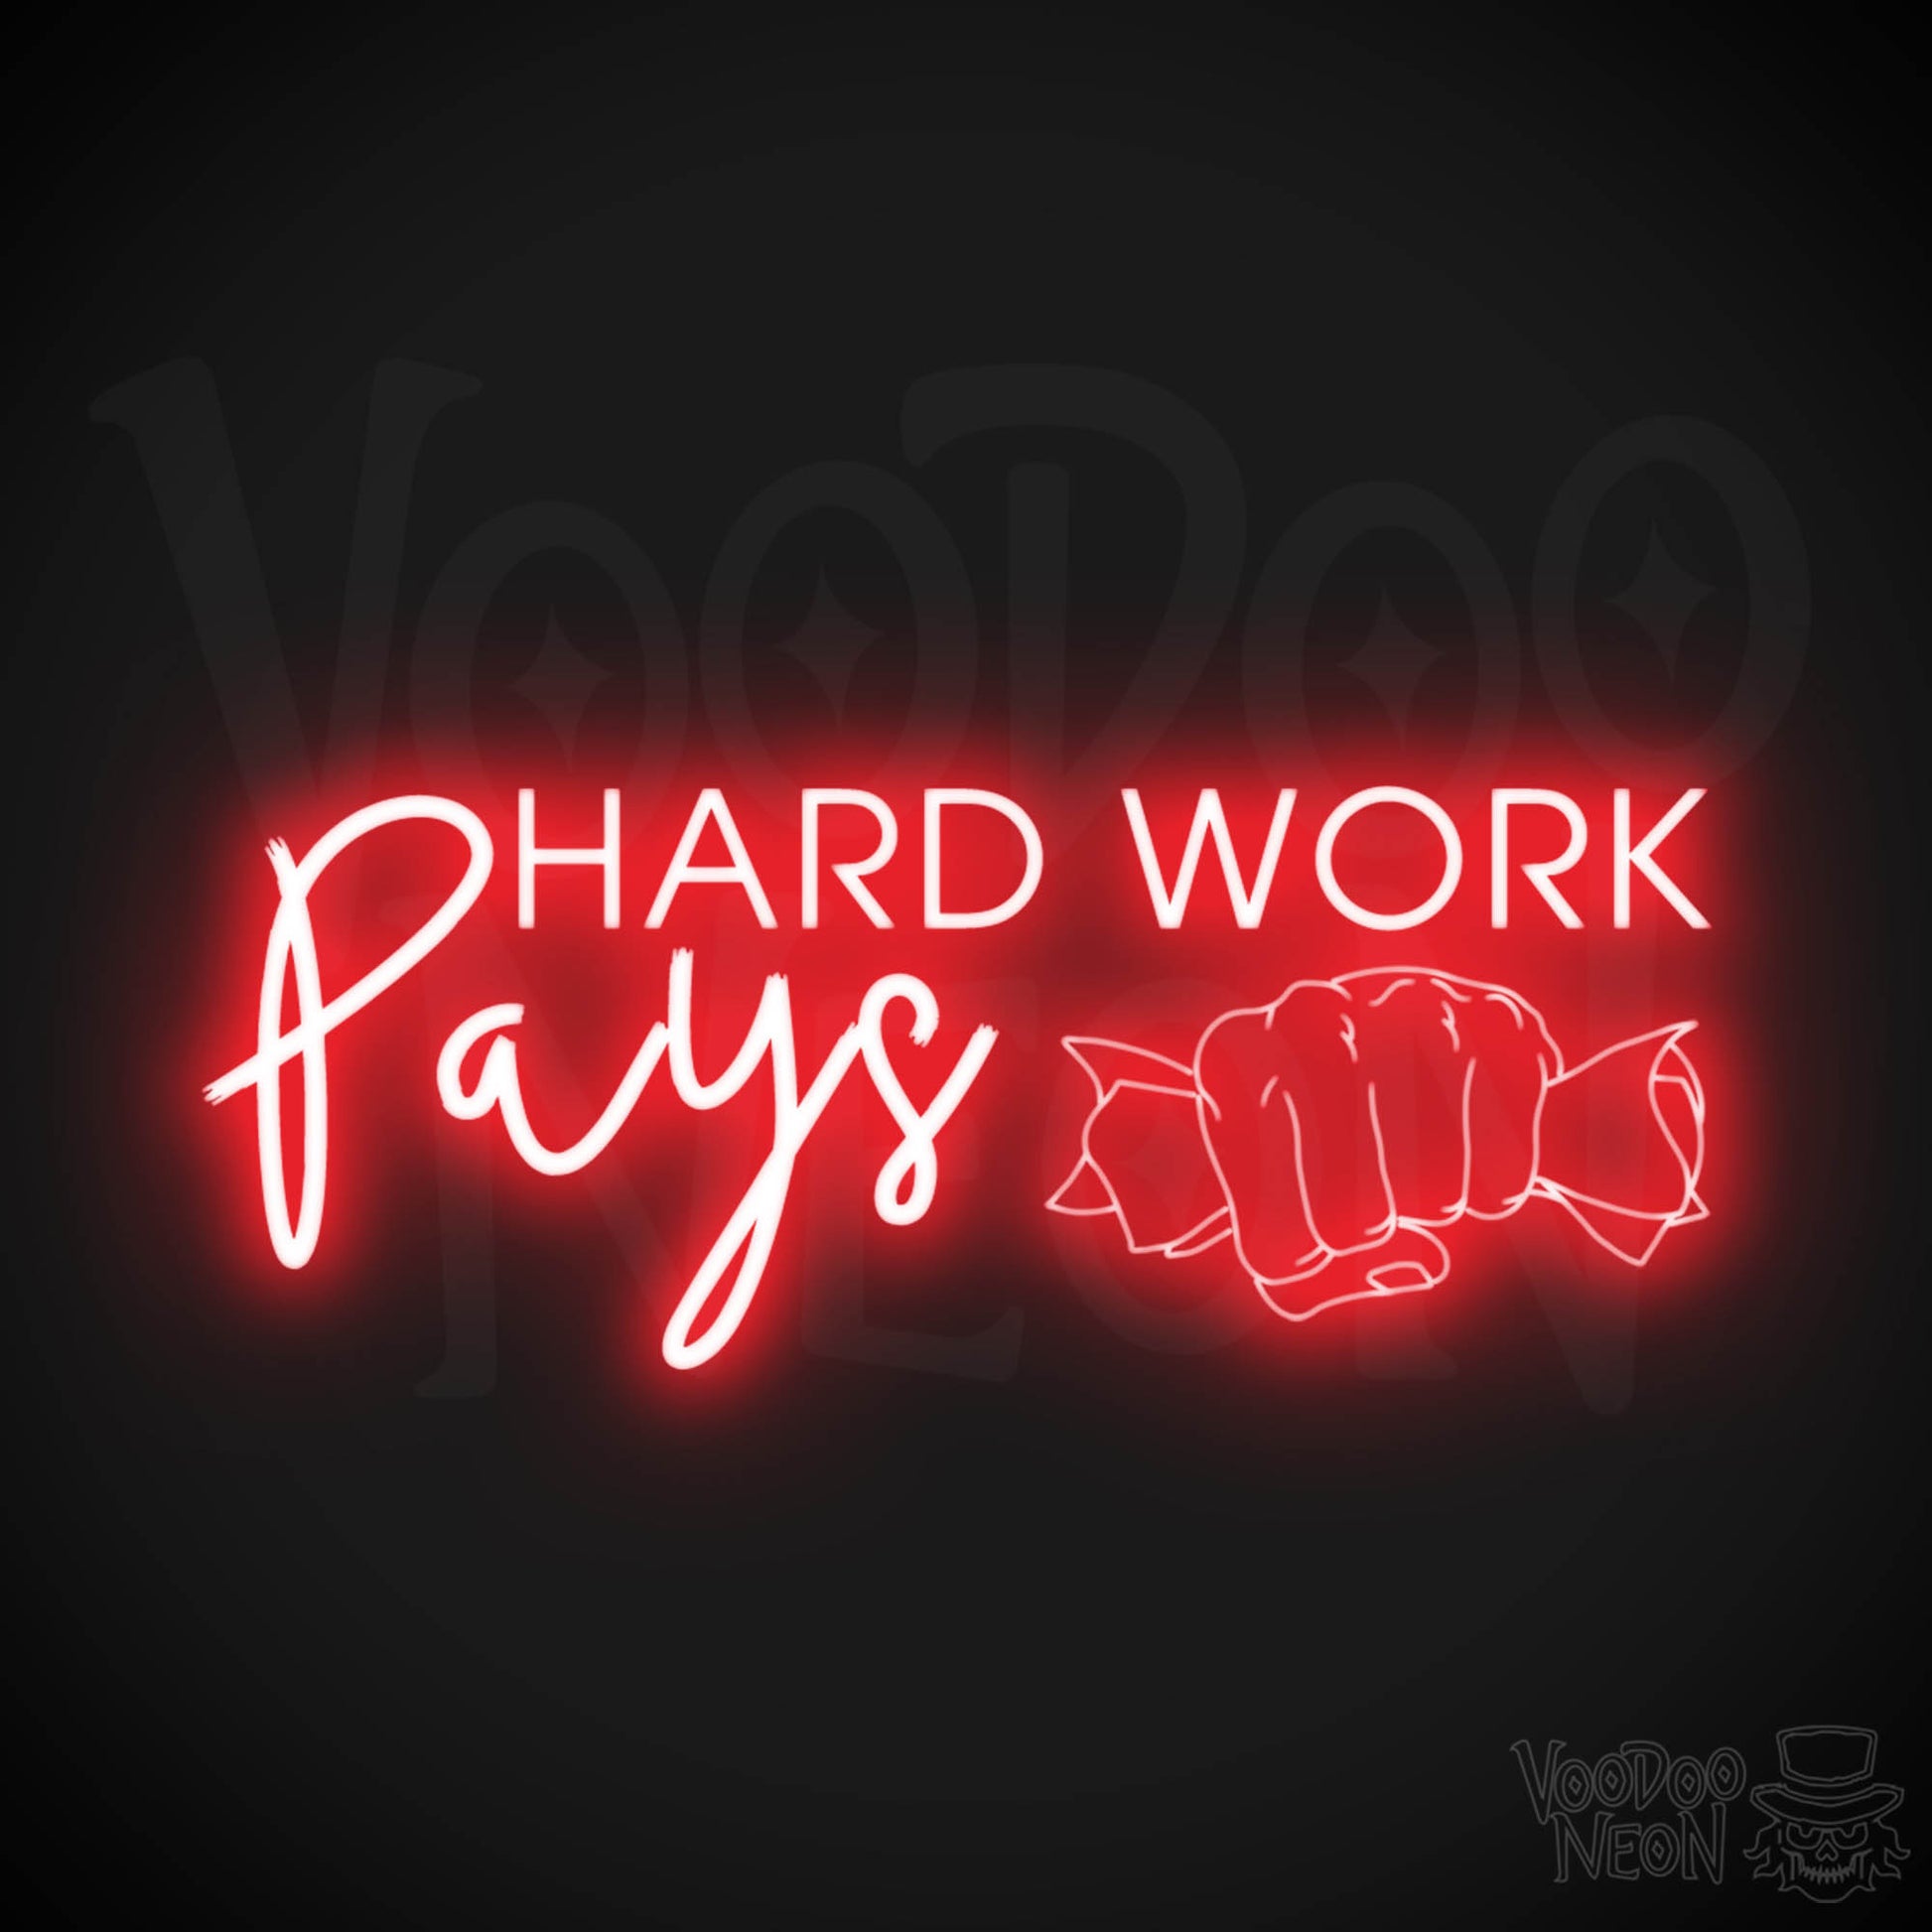 Hard Work Pays Neon Sign - LED Neon Wall Art - Color Red